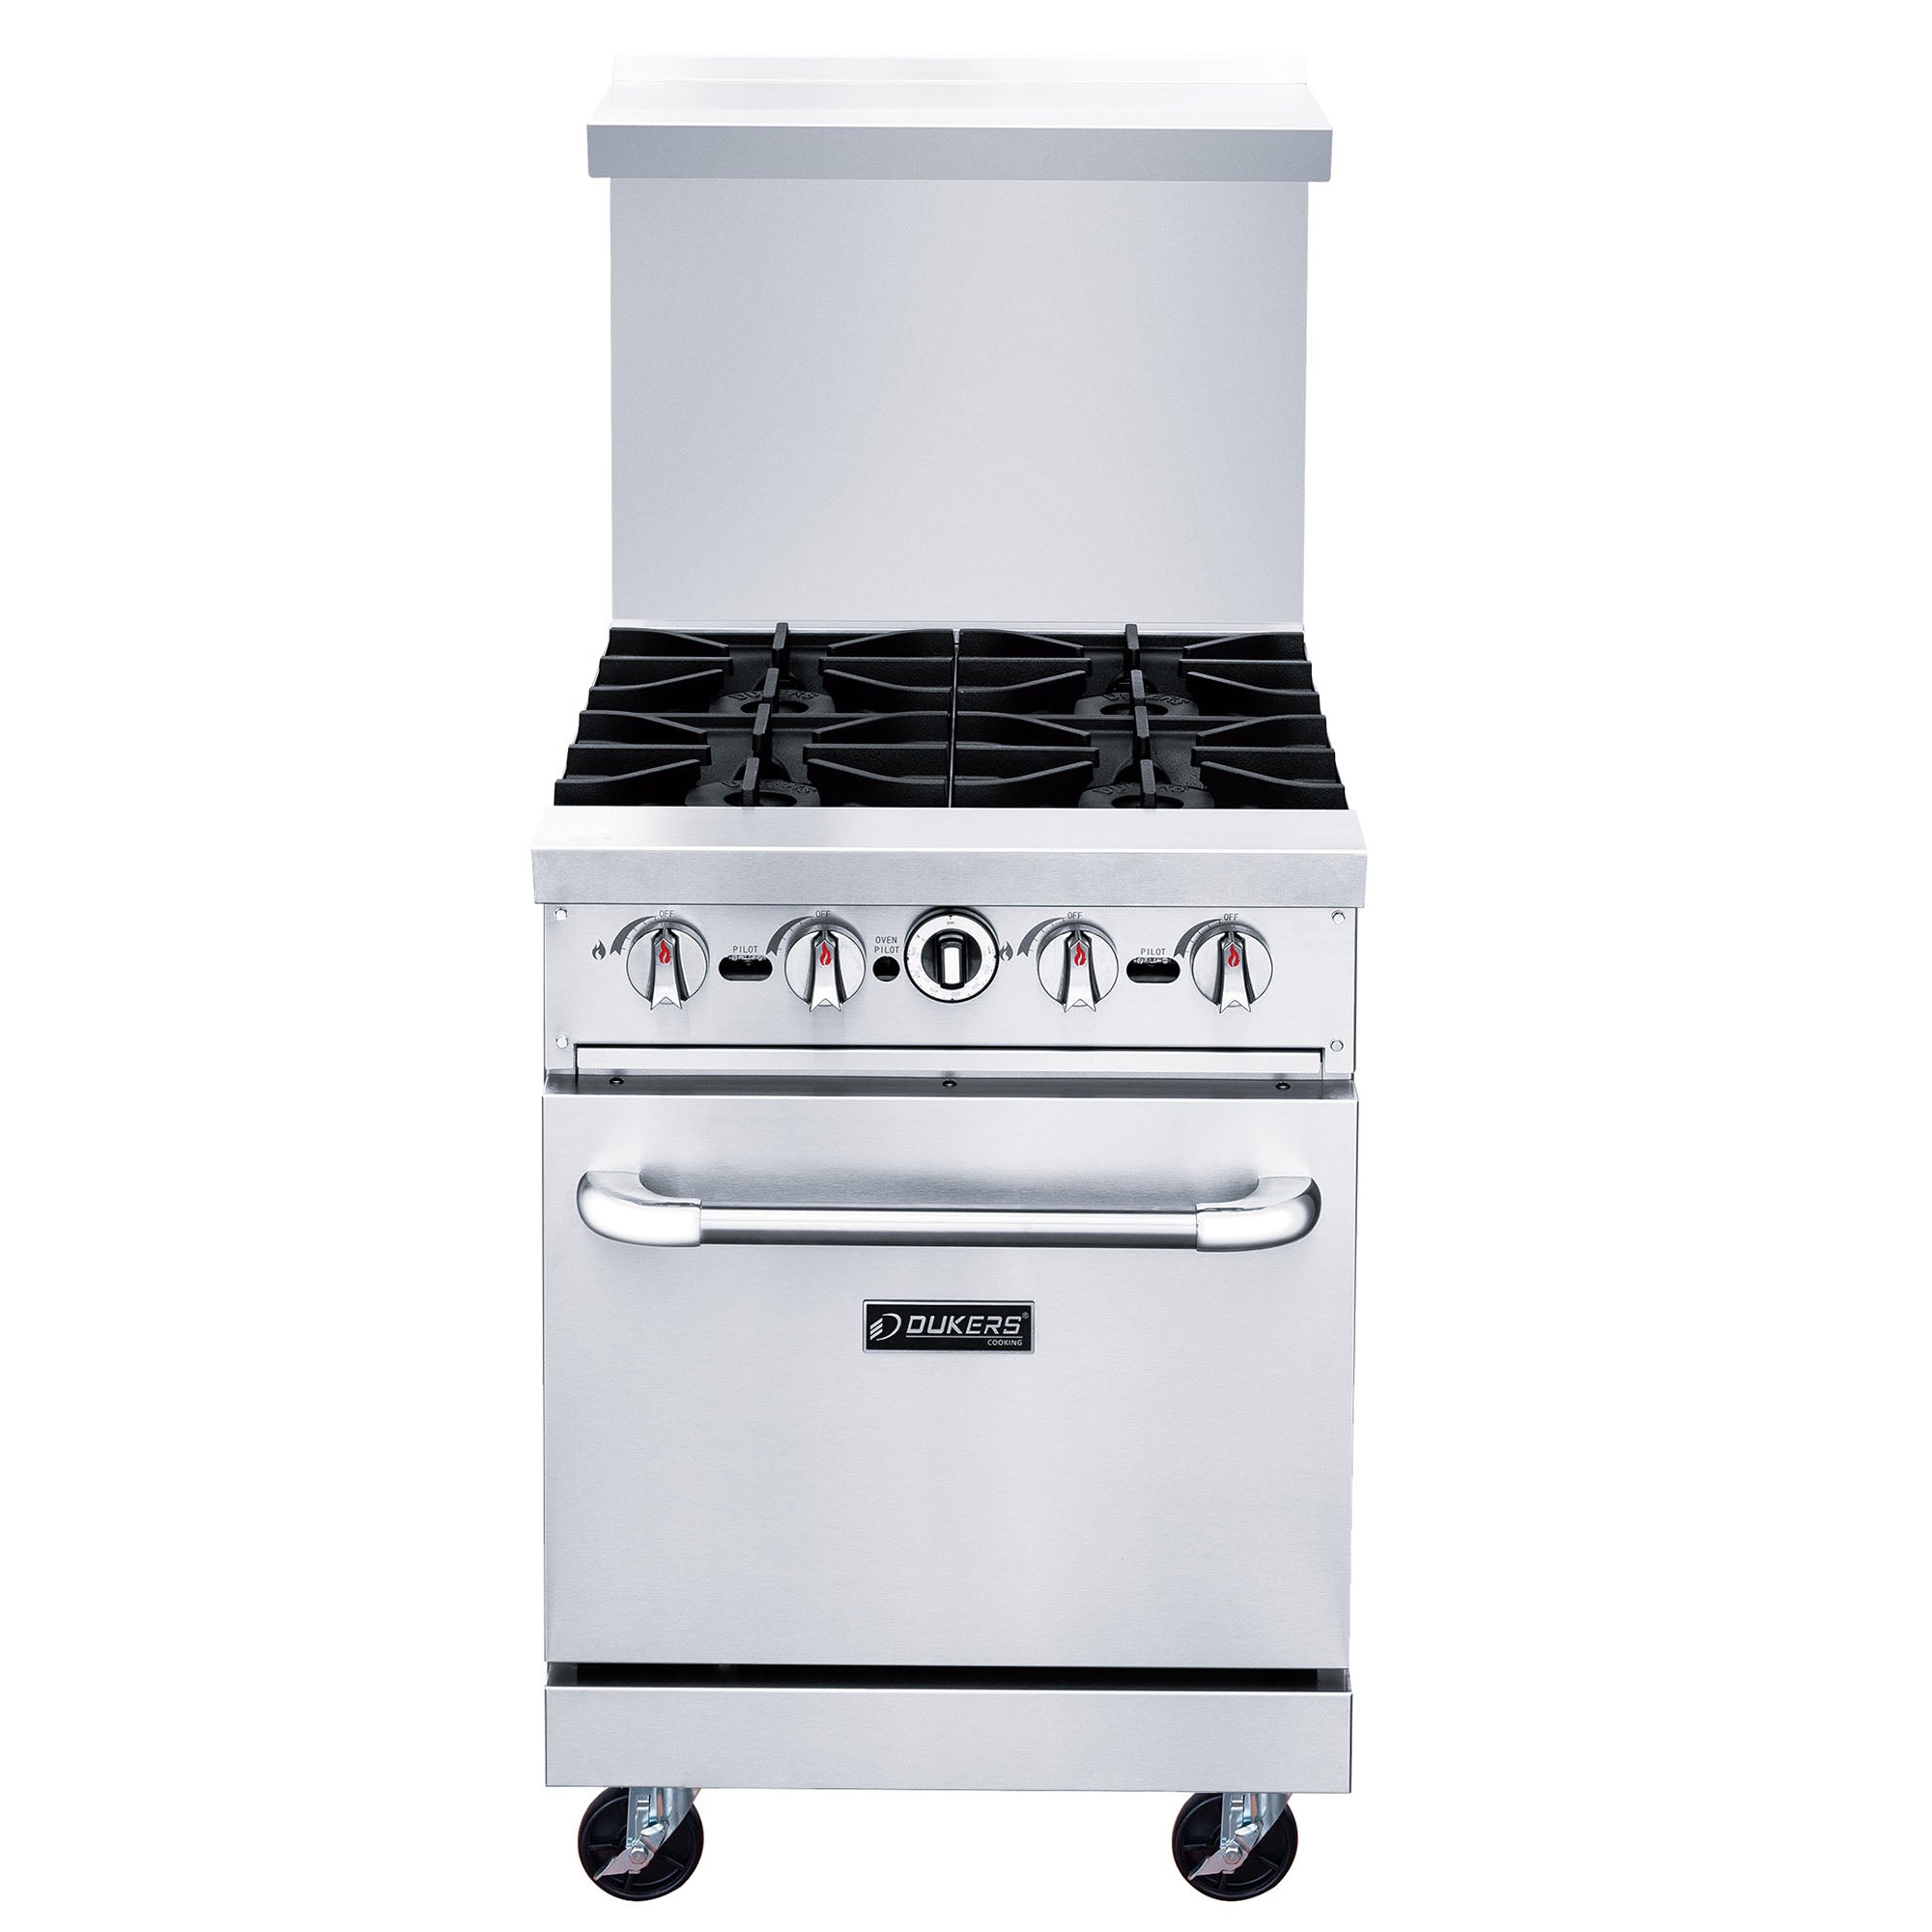 Dukers DCR24-4B 24″ Gas Range with Four (4) Open Burners